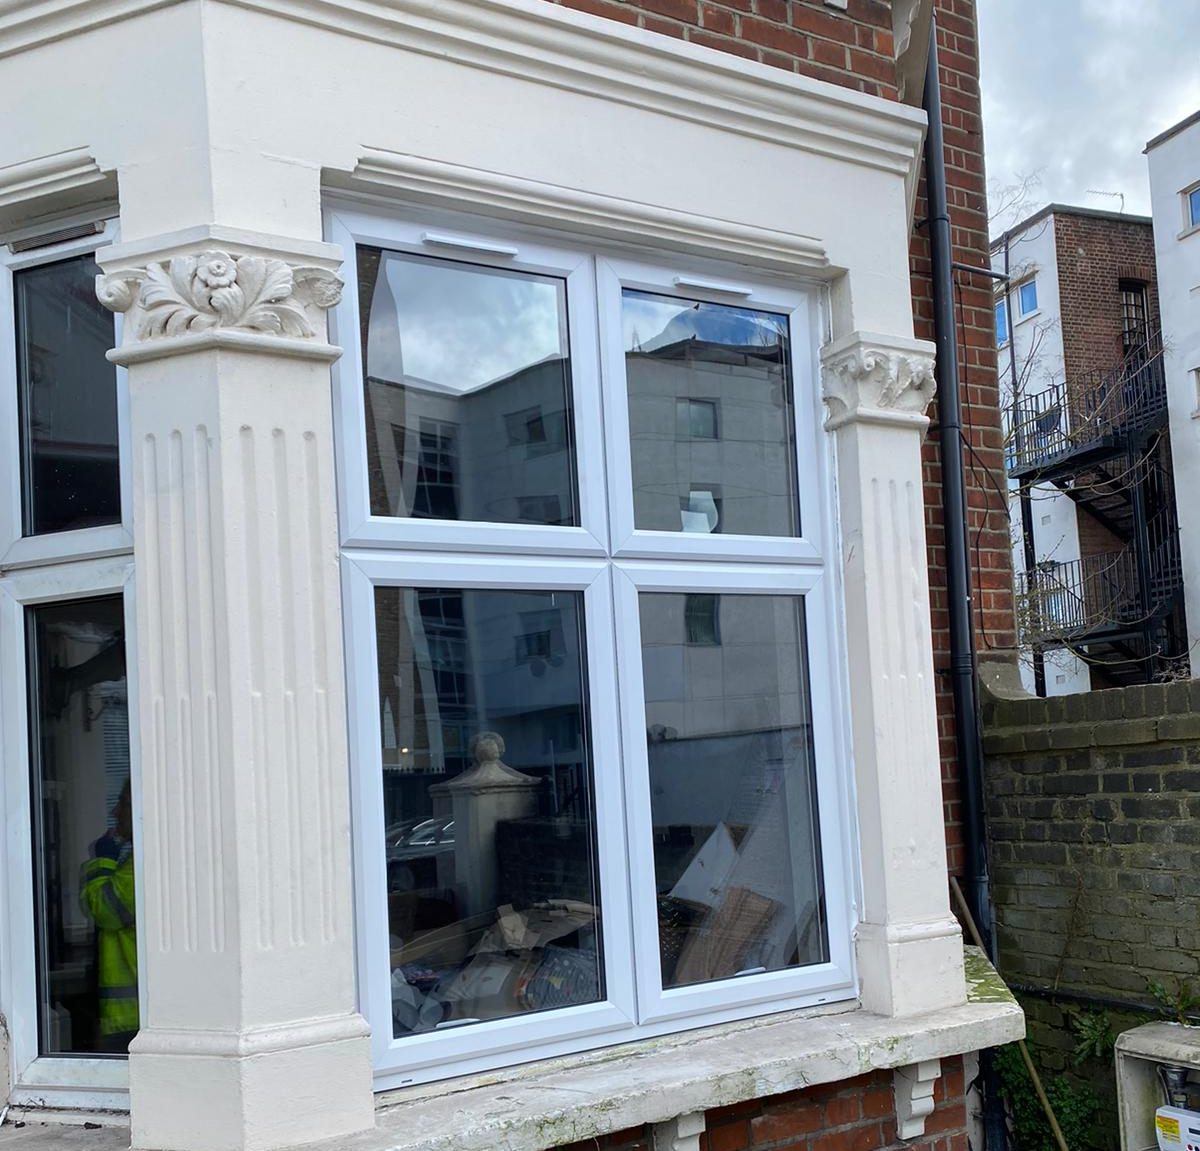 We can replace or repair your old UPVC windows in Romford and Upminster. We can replace your steamed up windows in Barking and Dagenham. We make new glass units to fit your window. We measure and replace your glass in UPVC and wooden windows. We also Repair UPVC doors in Barking and Dagenham. We can change door handles on UPVC Doors. We can supply and fit new UPVC doors near me. We can supply and fit made to measure decorative glass.